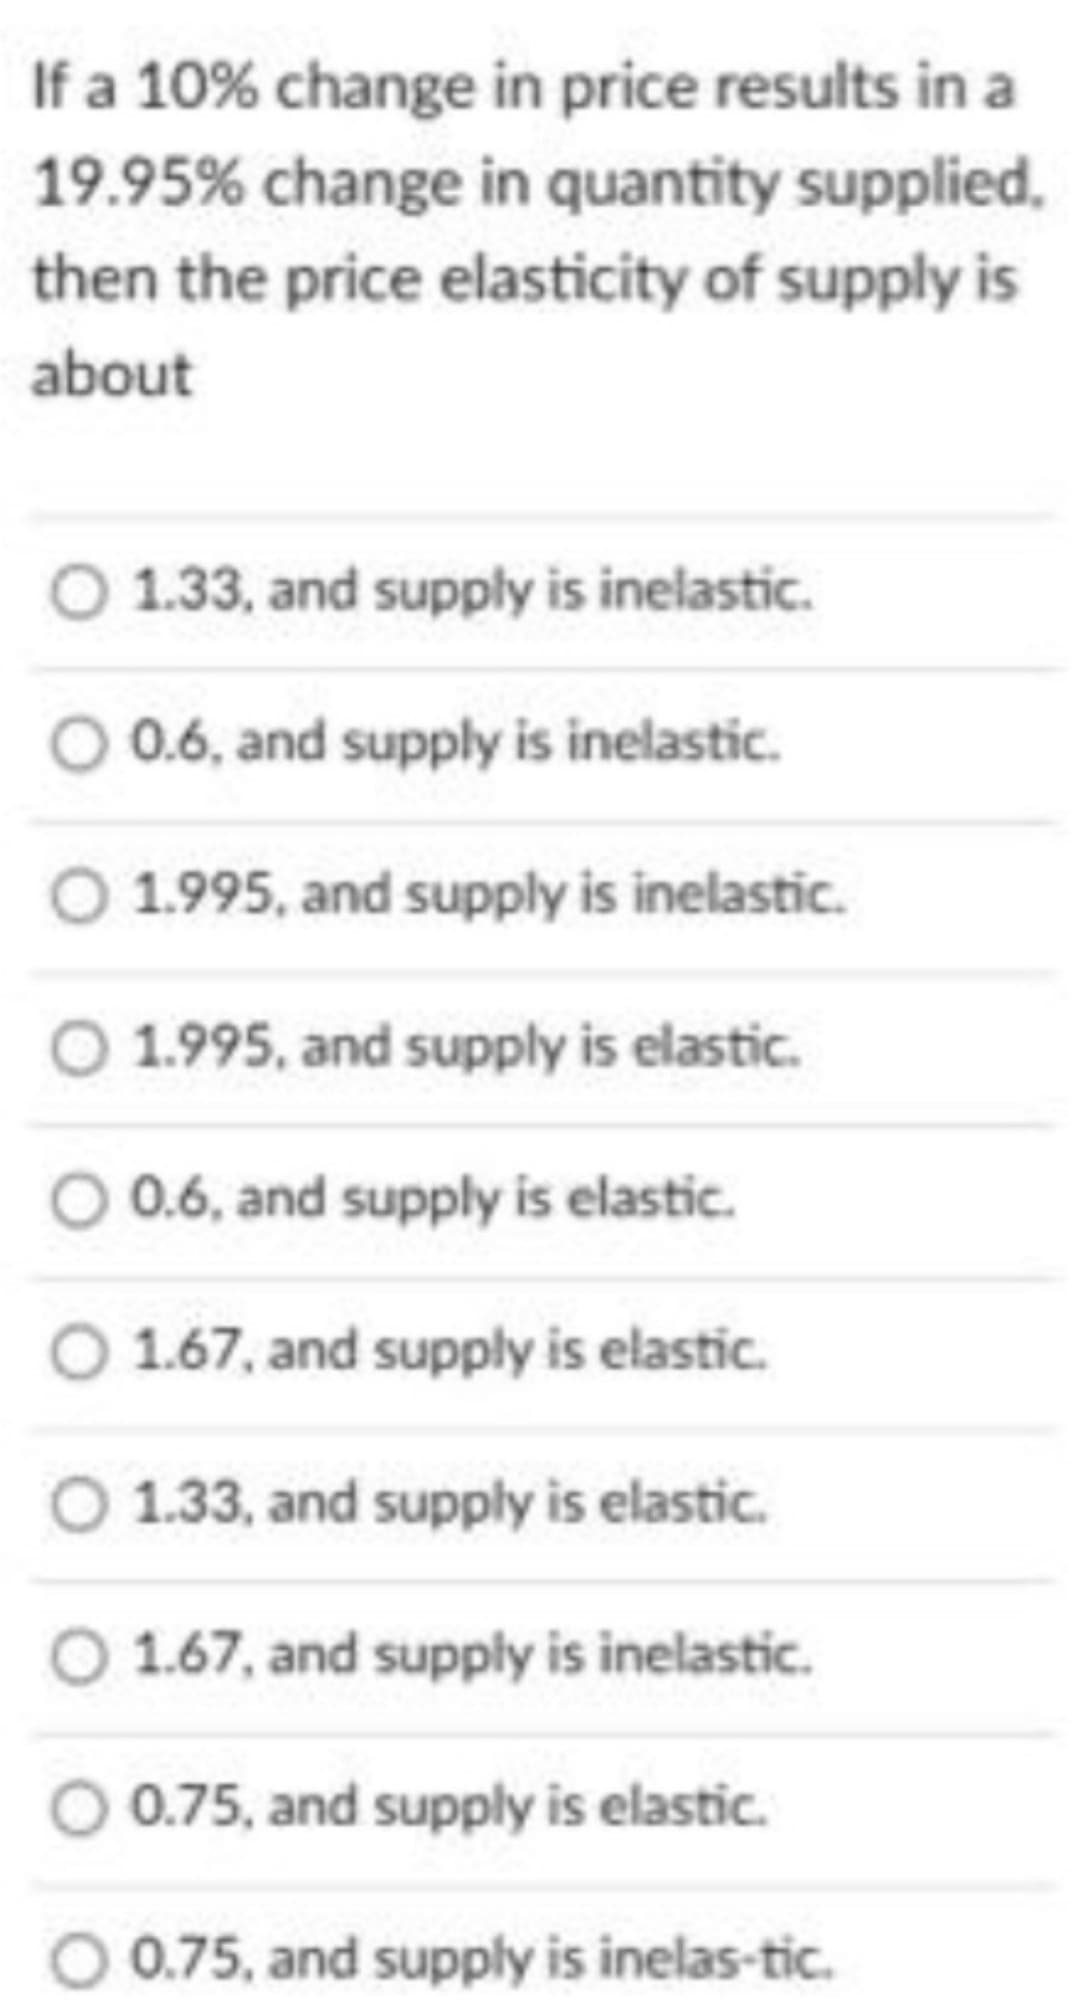 If a 10% change in price results in a
19.95% change in quantity supplied.
then the price elasticity of supply is
about
O 1.33, and supply is inelastic.
O 0.6, and supply is inelastic.
O 1.995, and supply is inelastic.
O 1.995, and supply is elastic.
O 0.6, and supply is elastic.
O 1.67, and supply is elastic.
O 1.33, and supply is elastic.
O 1.67, and supply is inelastic.
O 0.75, and supply is elastic.
O 0.75, and supply is inelas-tic.
